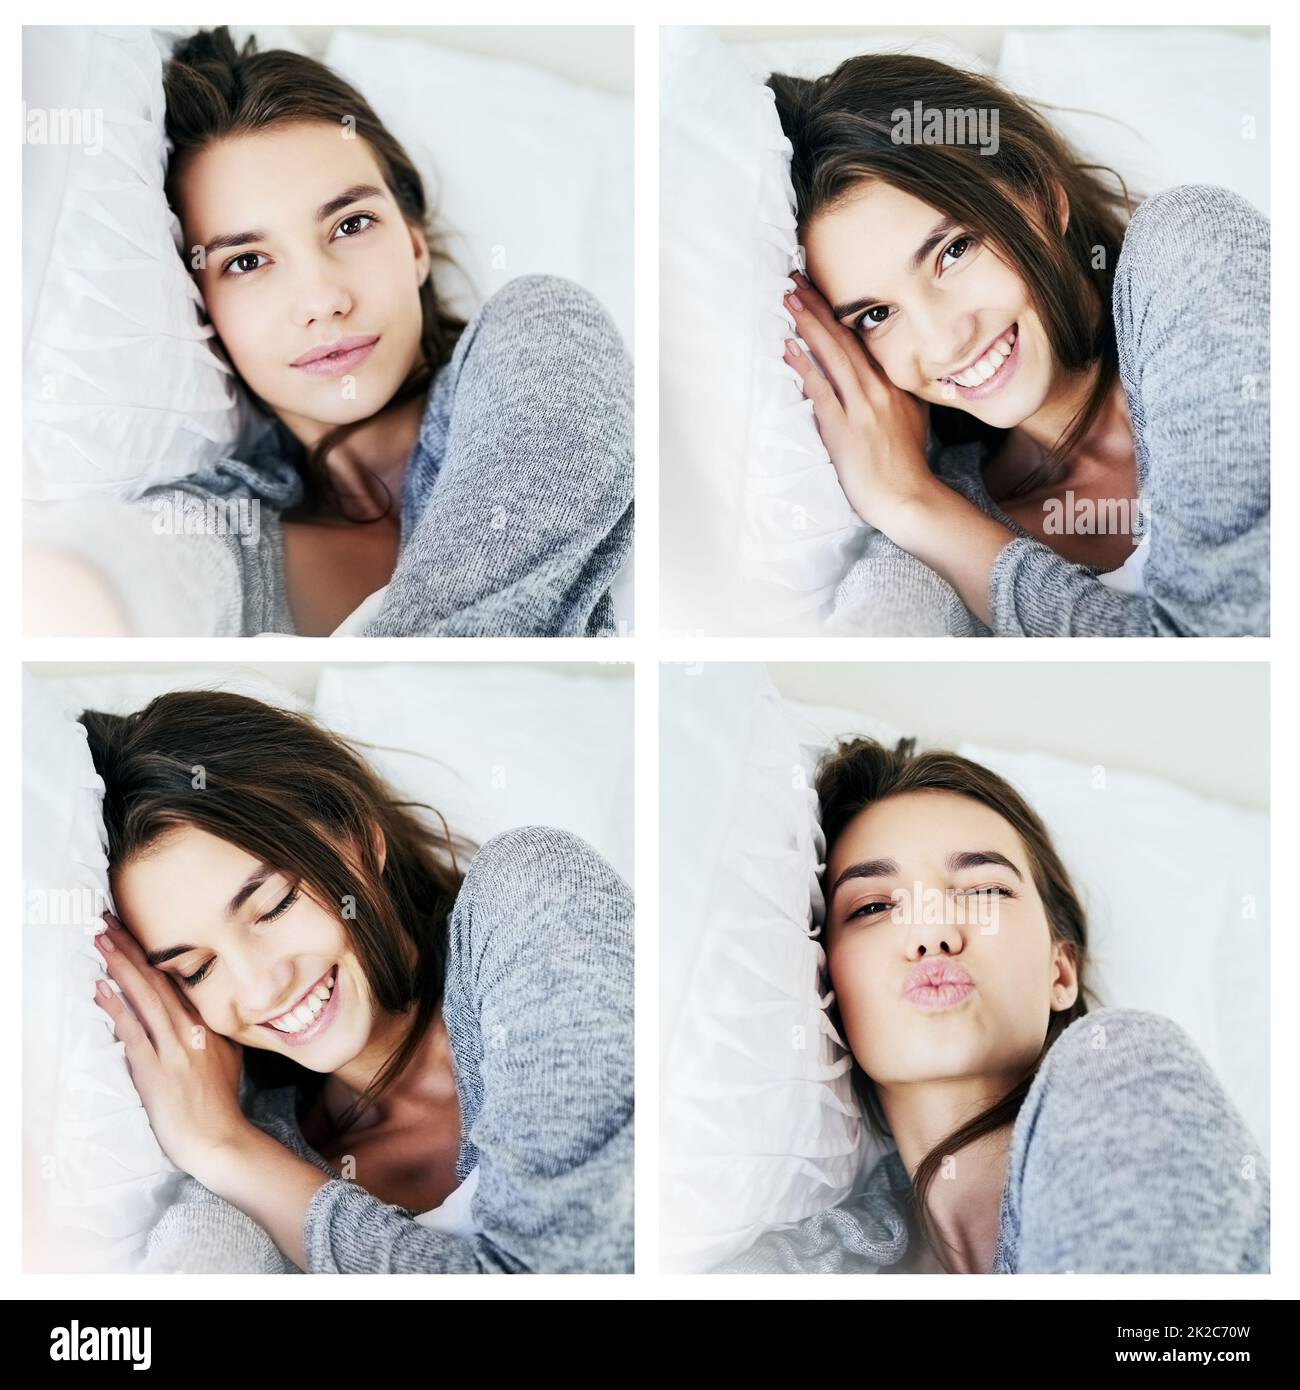 She has the looks that make you melt. Composite shot of an attractive young woman taking self portraits and blowing kisses while lying in bed at home during the day. Stock Photo